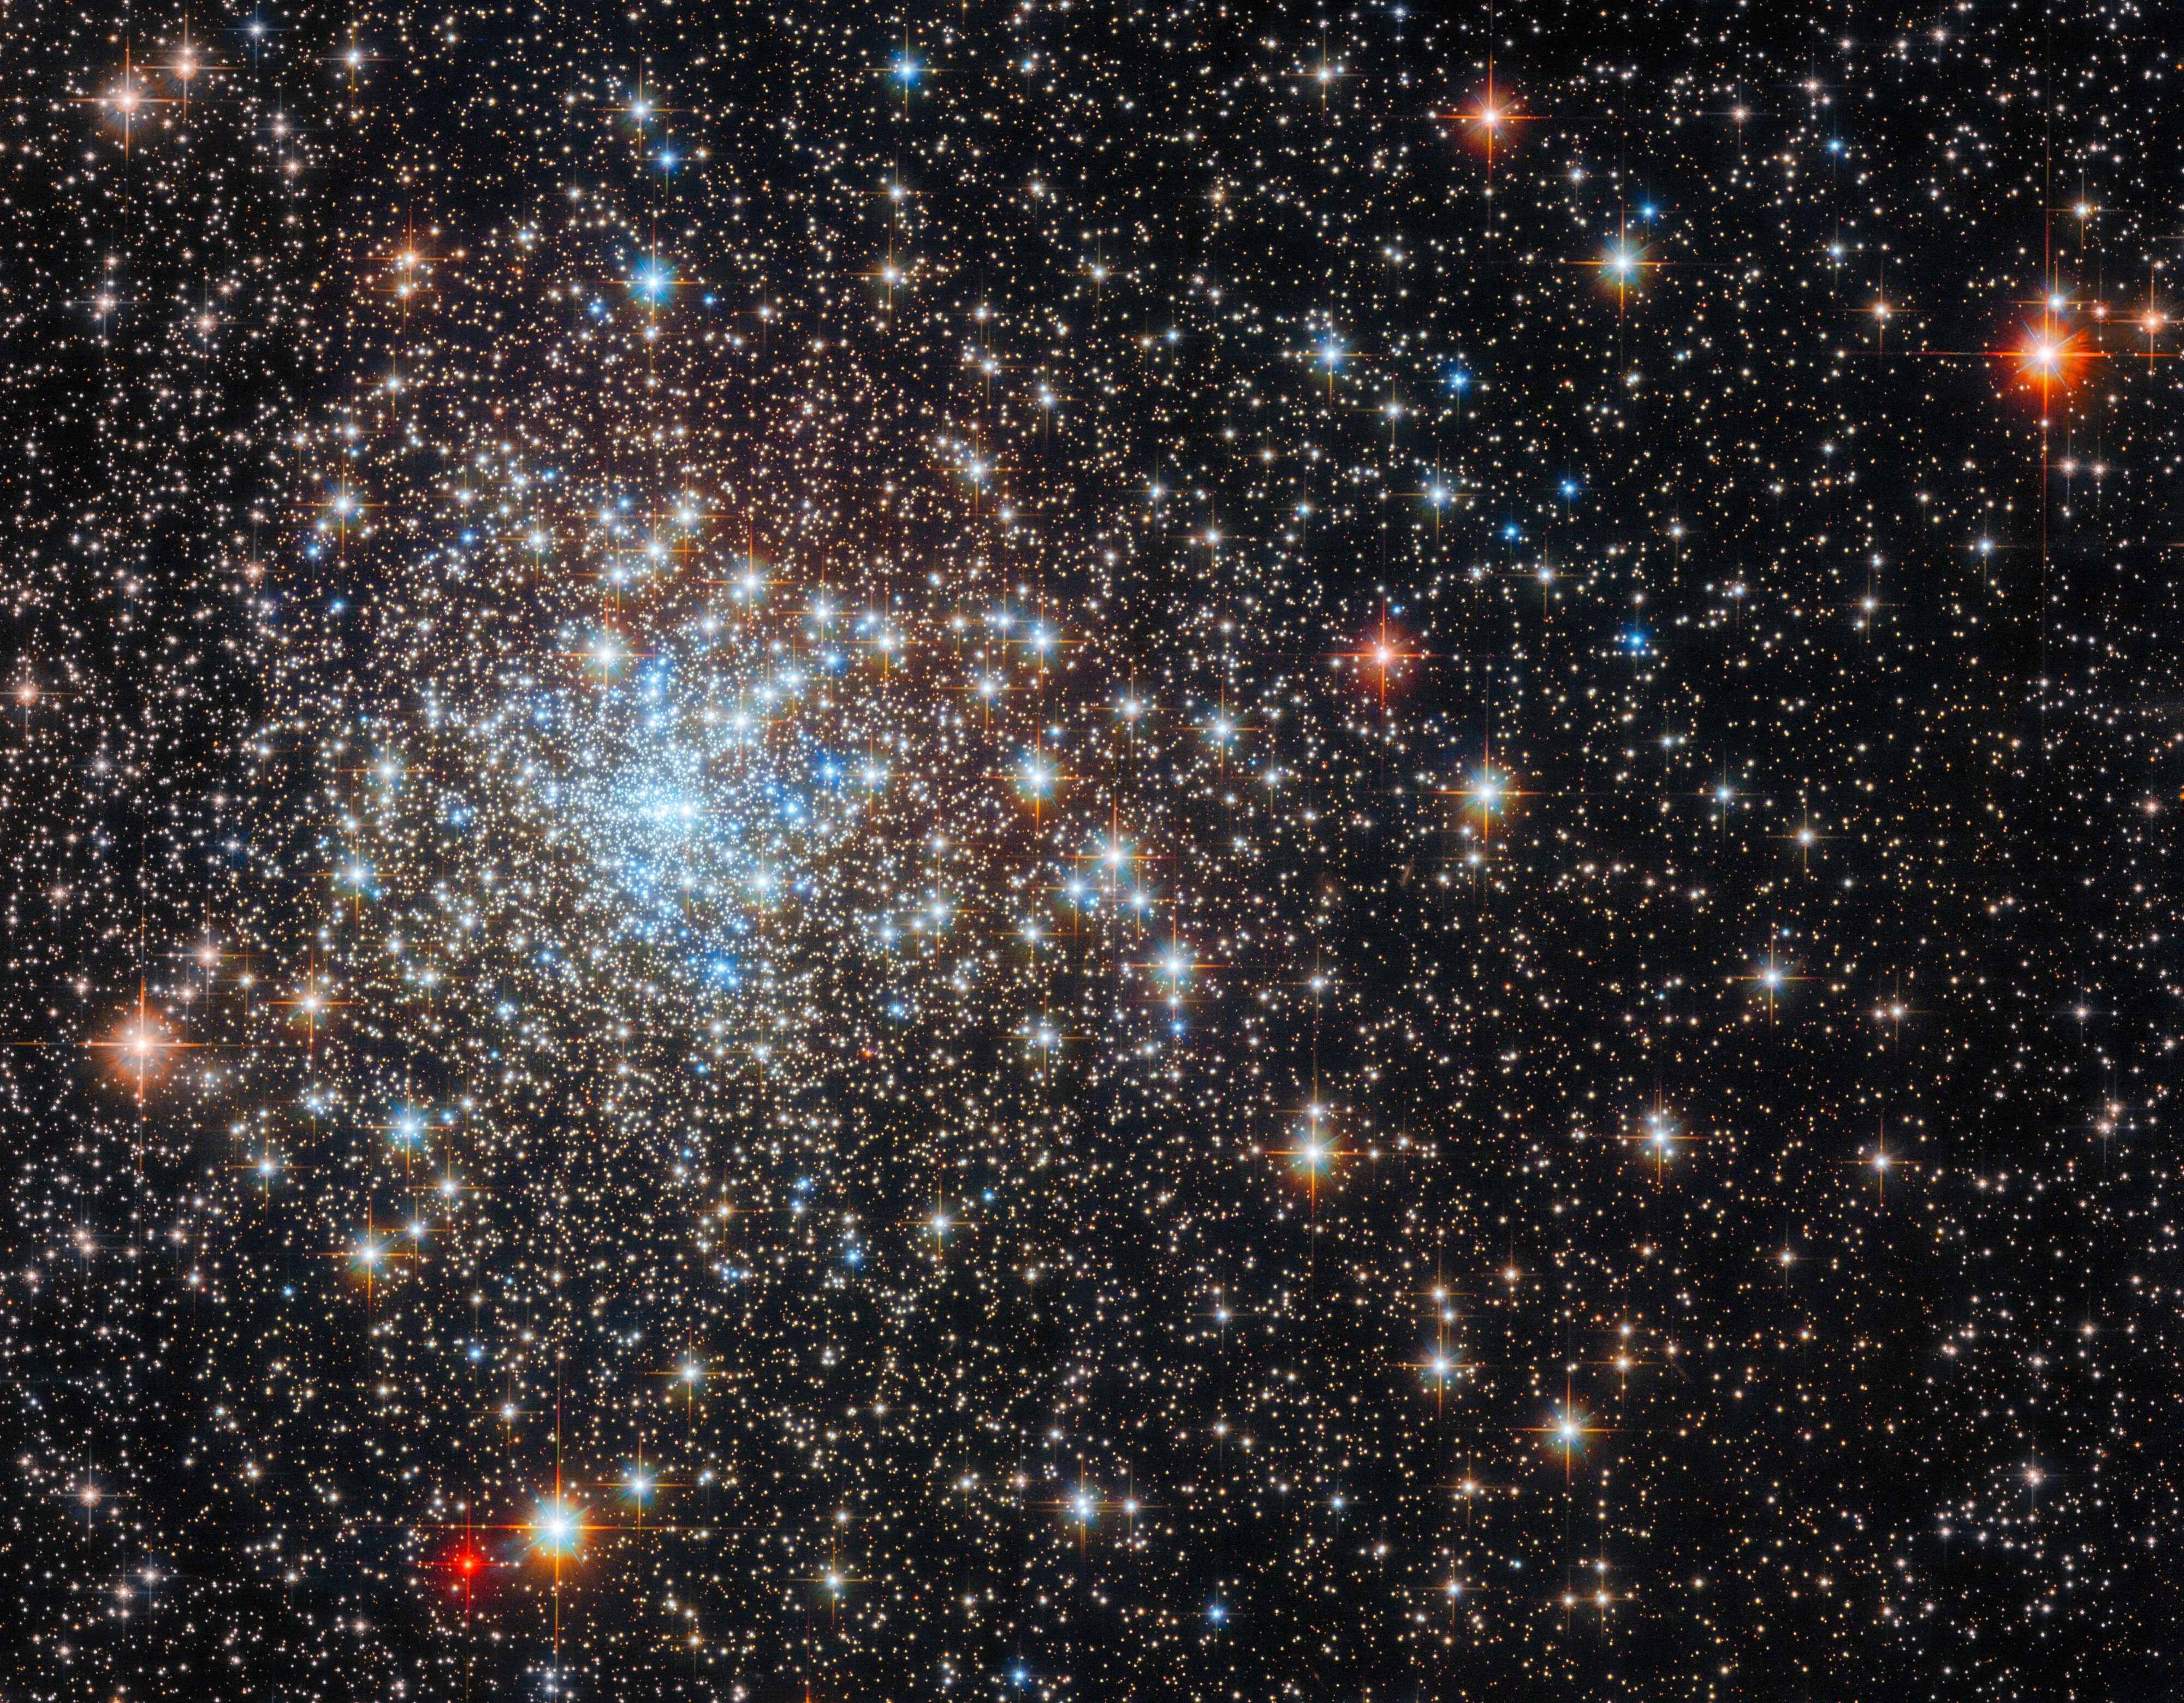 A dense cluster of bright stars. The core of the cluster is to the left and has a distinct group of blue stars. Surrounding the core are a multitude of stars in warmer colors. These stars are very numerous near the core and become more sparse, as well as more small and distant, out to the sides of the image. A few larger stars also stand in the foreground near the edges of the image.]